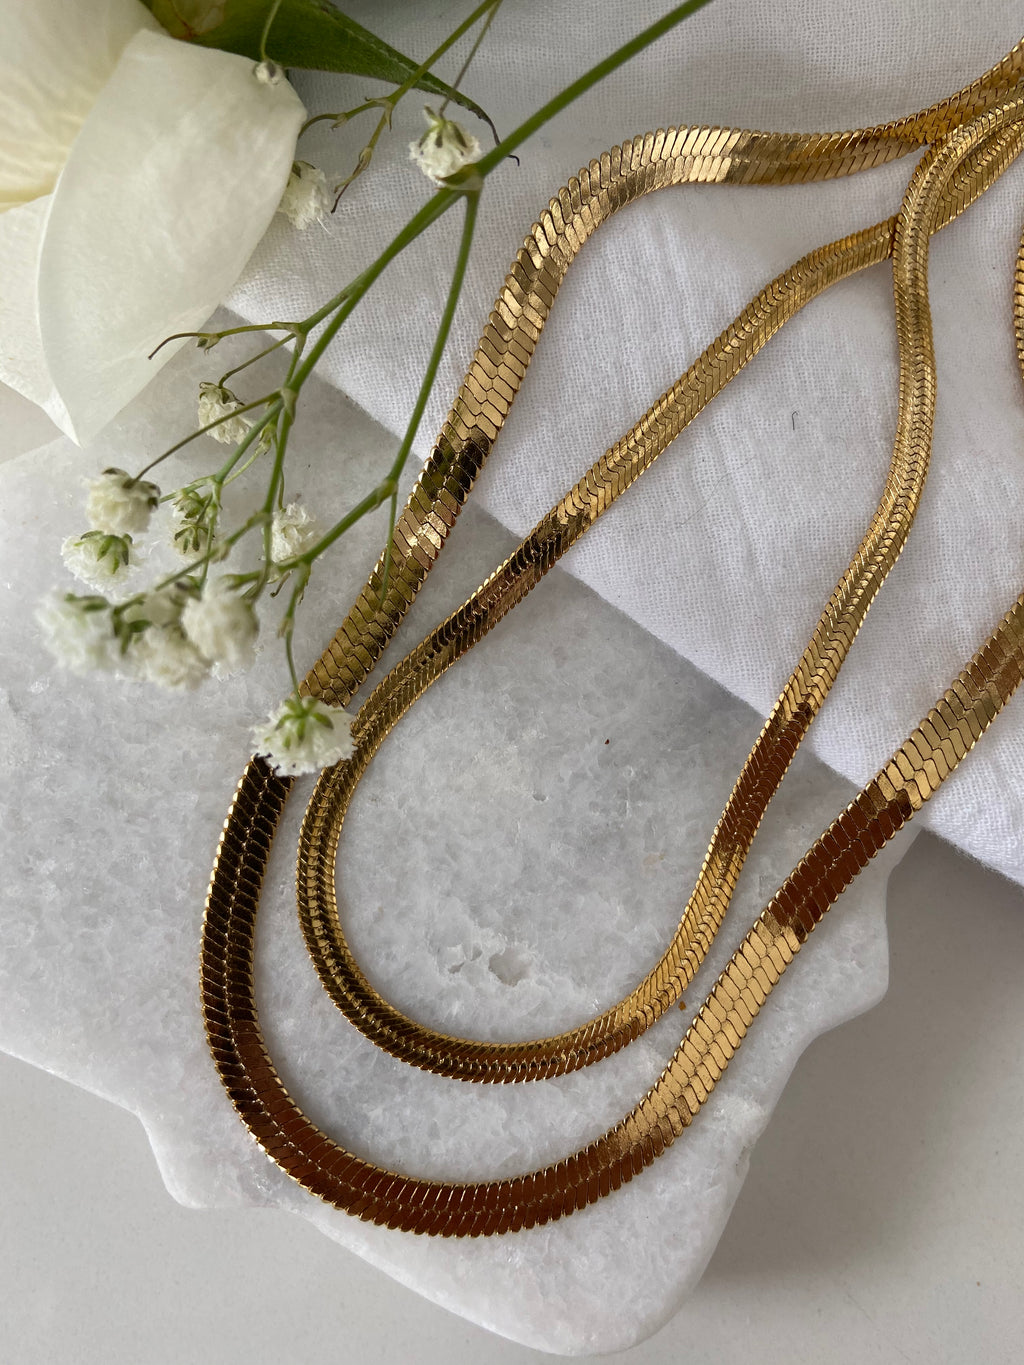 Already styled snake set to make it easy for you! 14 Karat Gold Plated Tarnish Resistance Hypoallergenic 4mm width, 40cm length chain + 5mm width, 45cm length chain | Double Snake Chain Necklace Set | Handmade Jewelry EasyClubCo